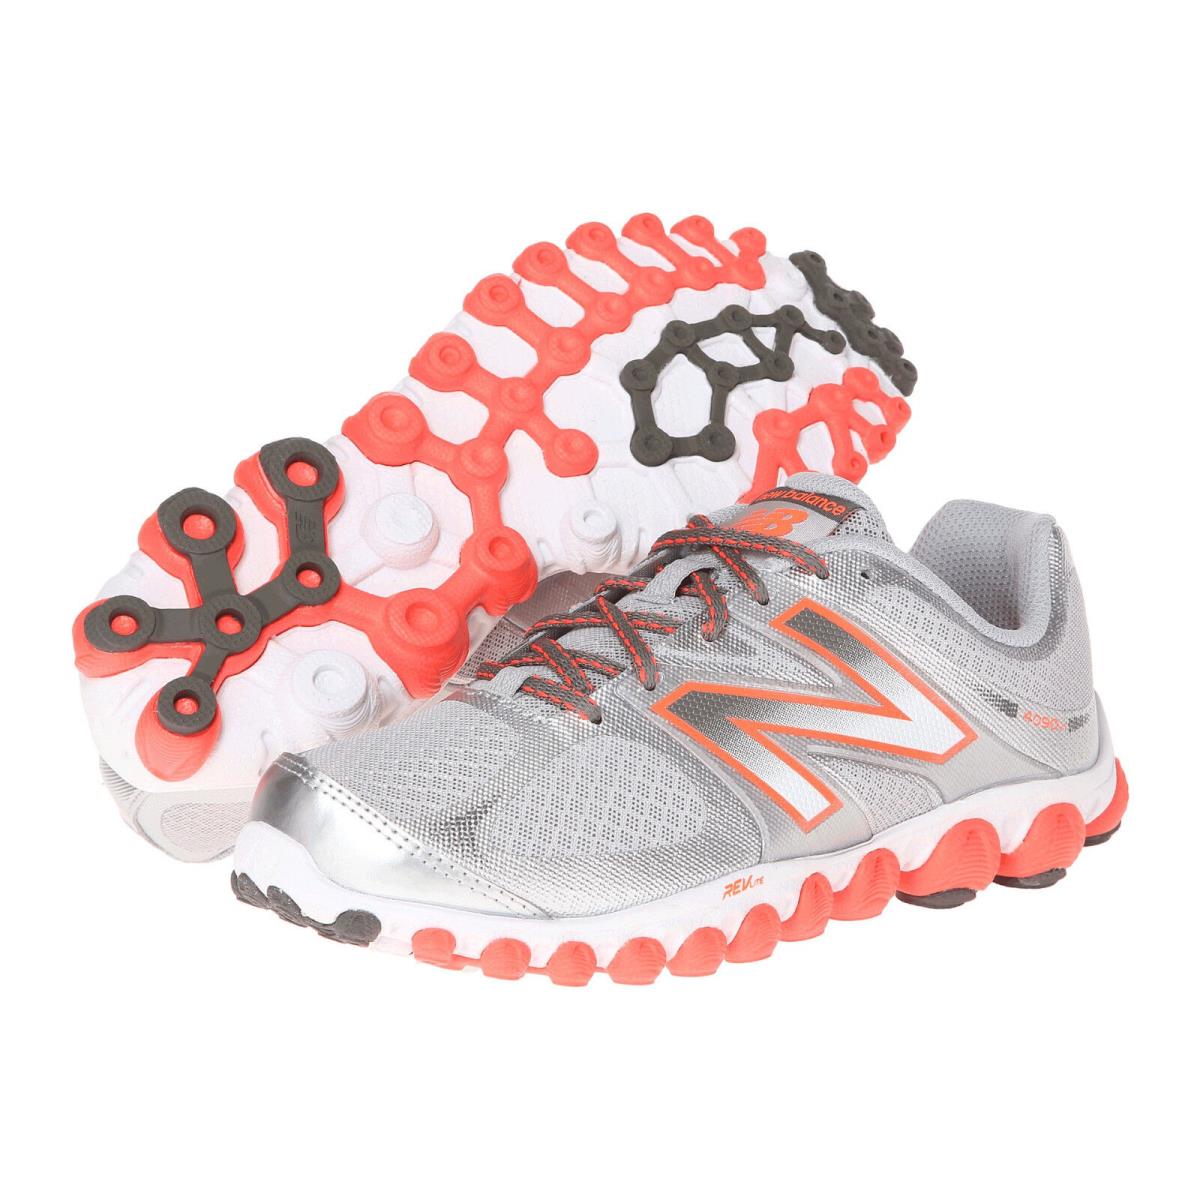 New Womens New Balance 4090 Running Sneakers Shoes - 8